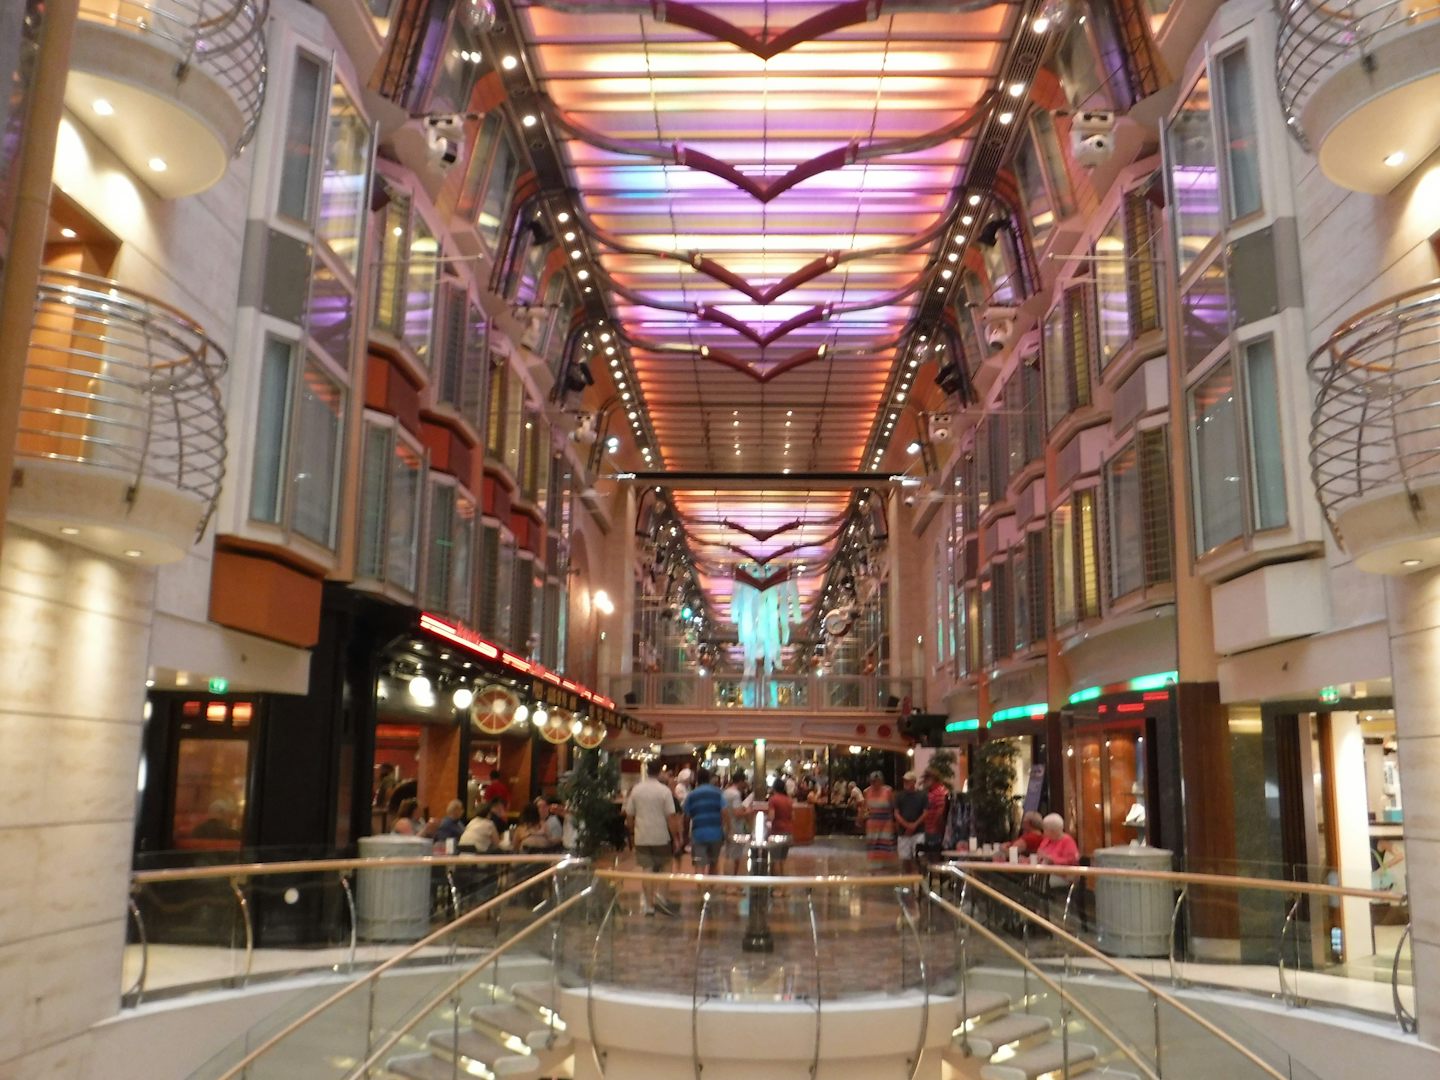 The Promenade is situated in the middle of the ship on Deck 5.  The shops a